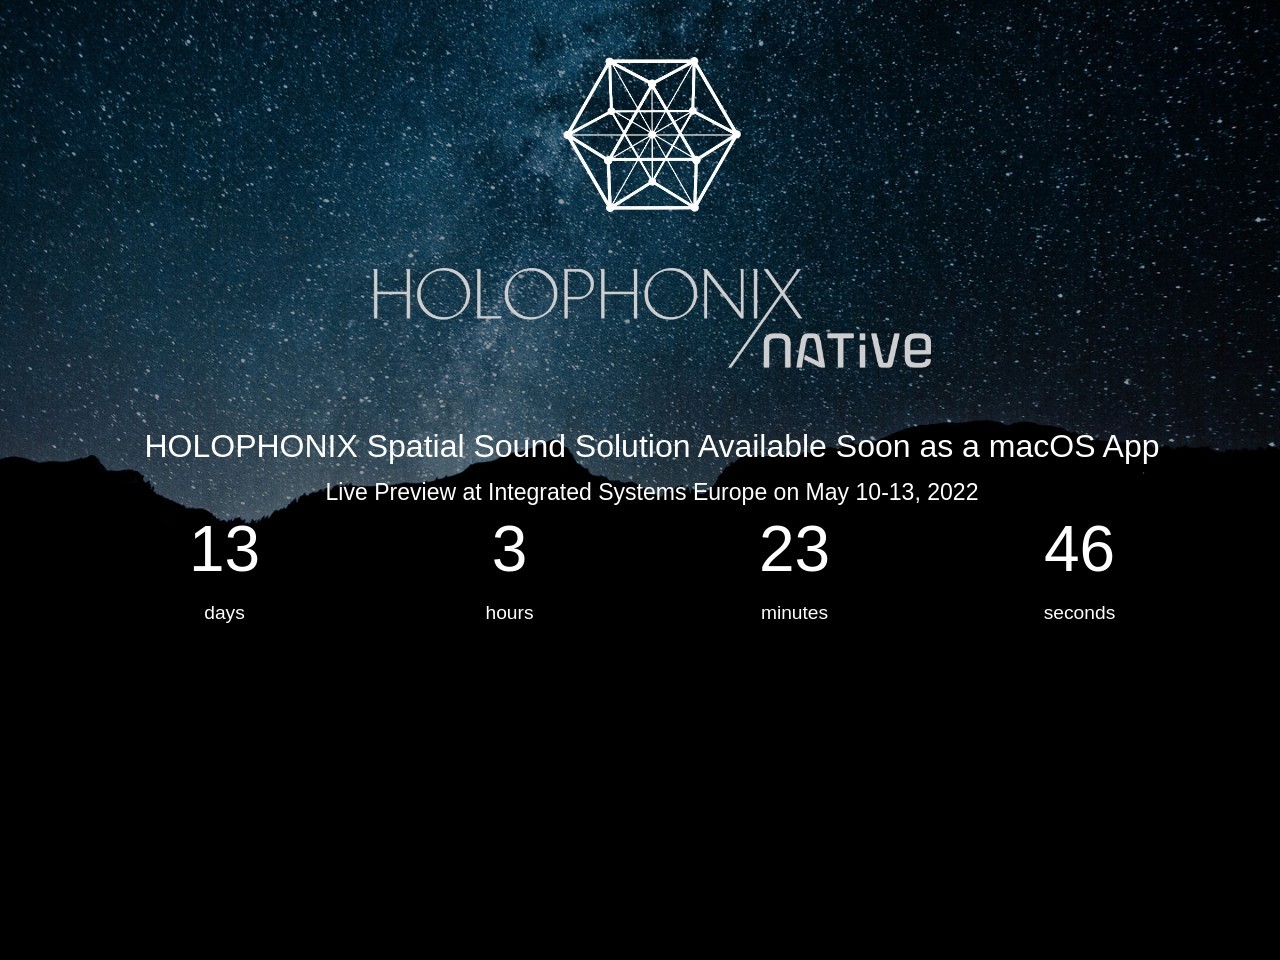 HOLOPHONIX | Immersive Sound Solution by Amadeus and IRCAM Institute